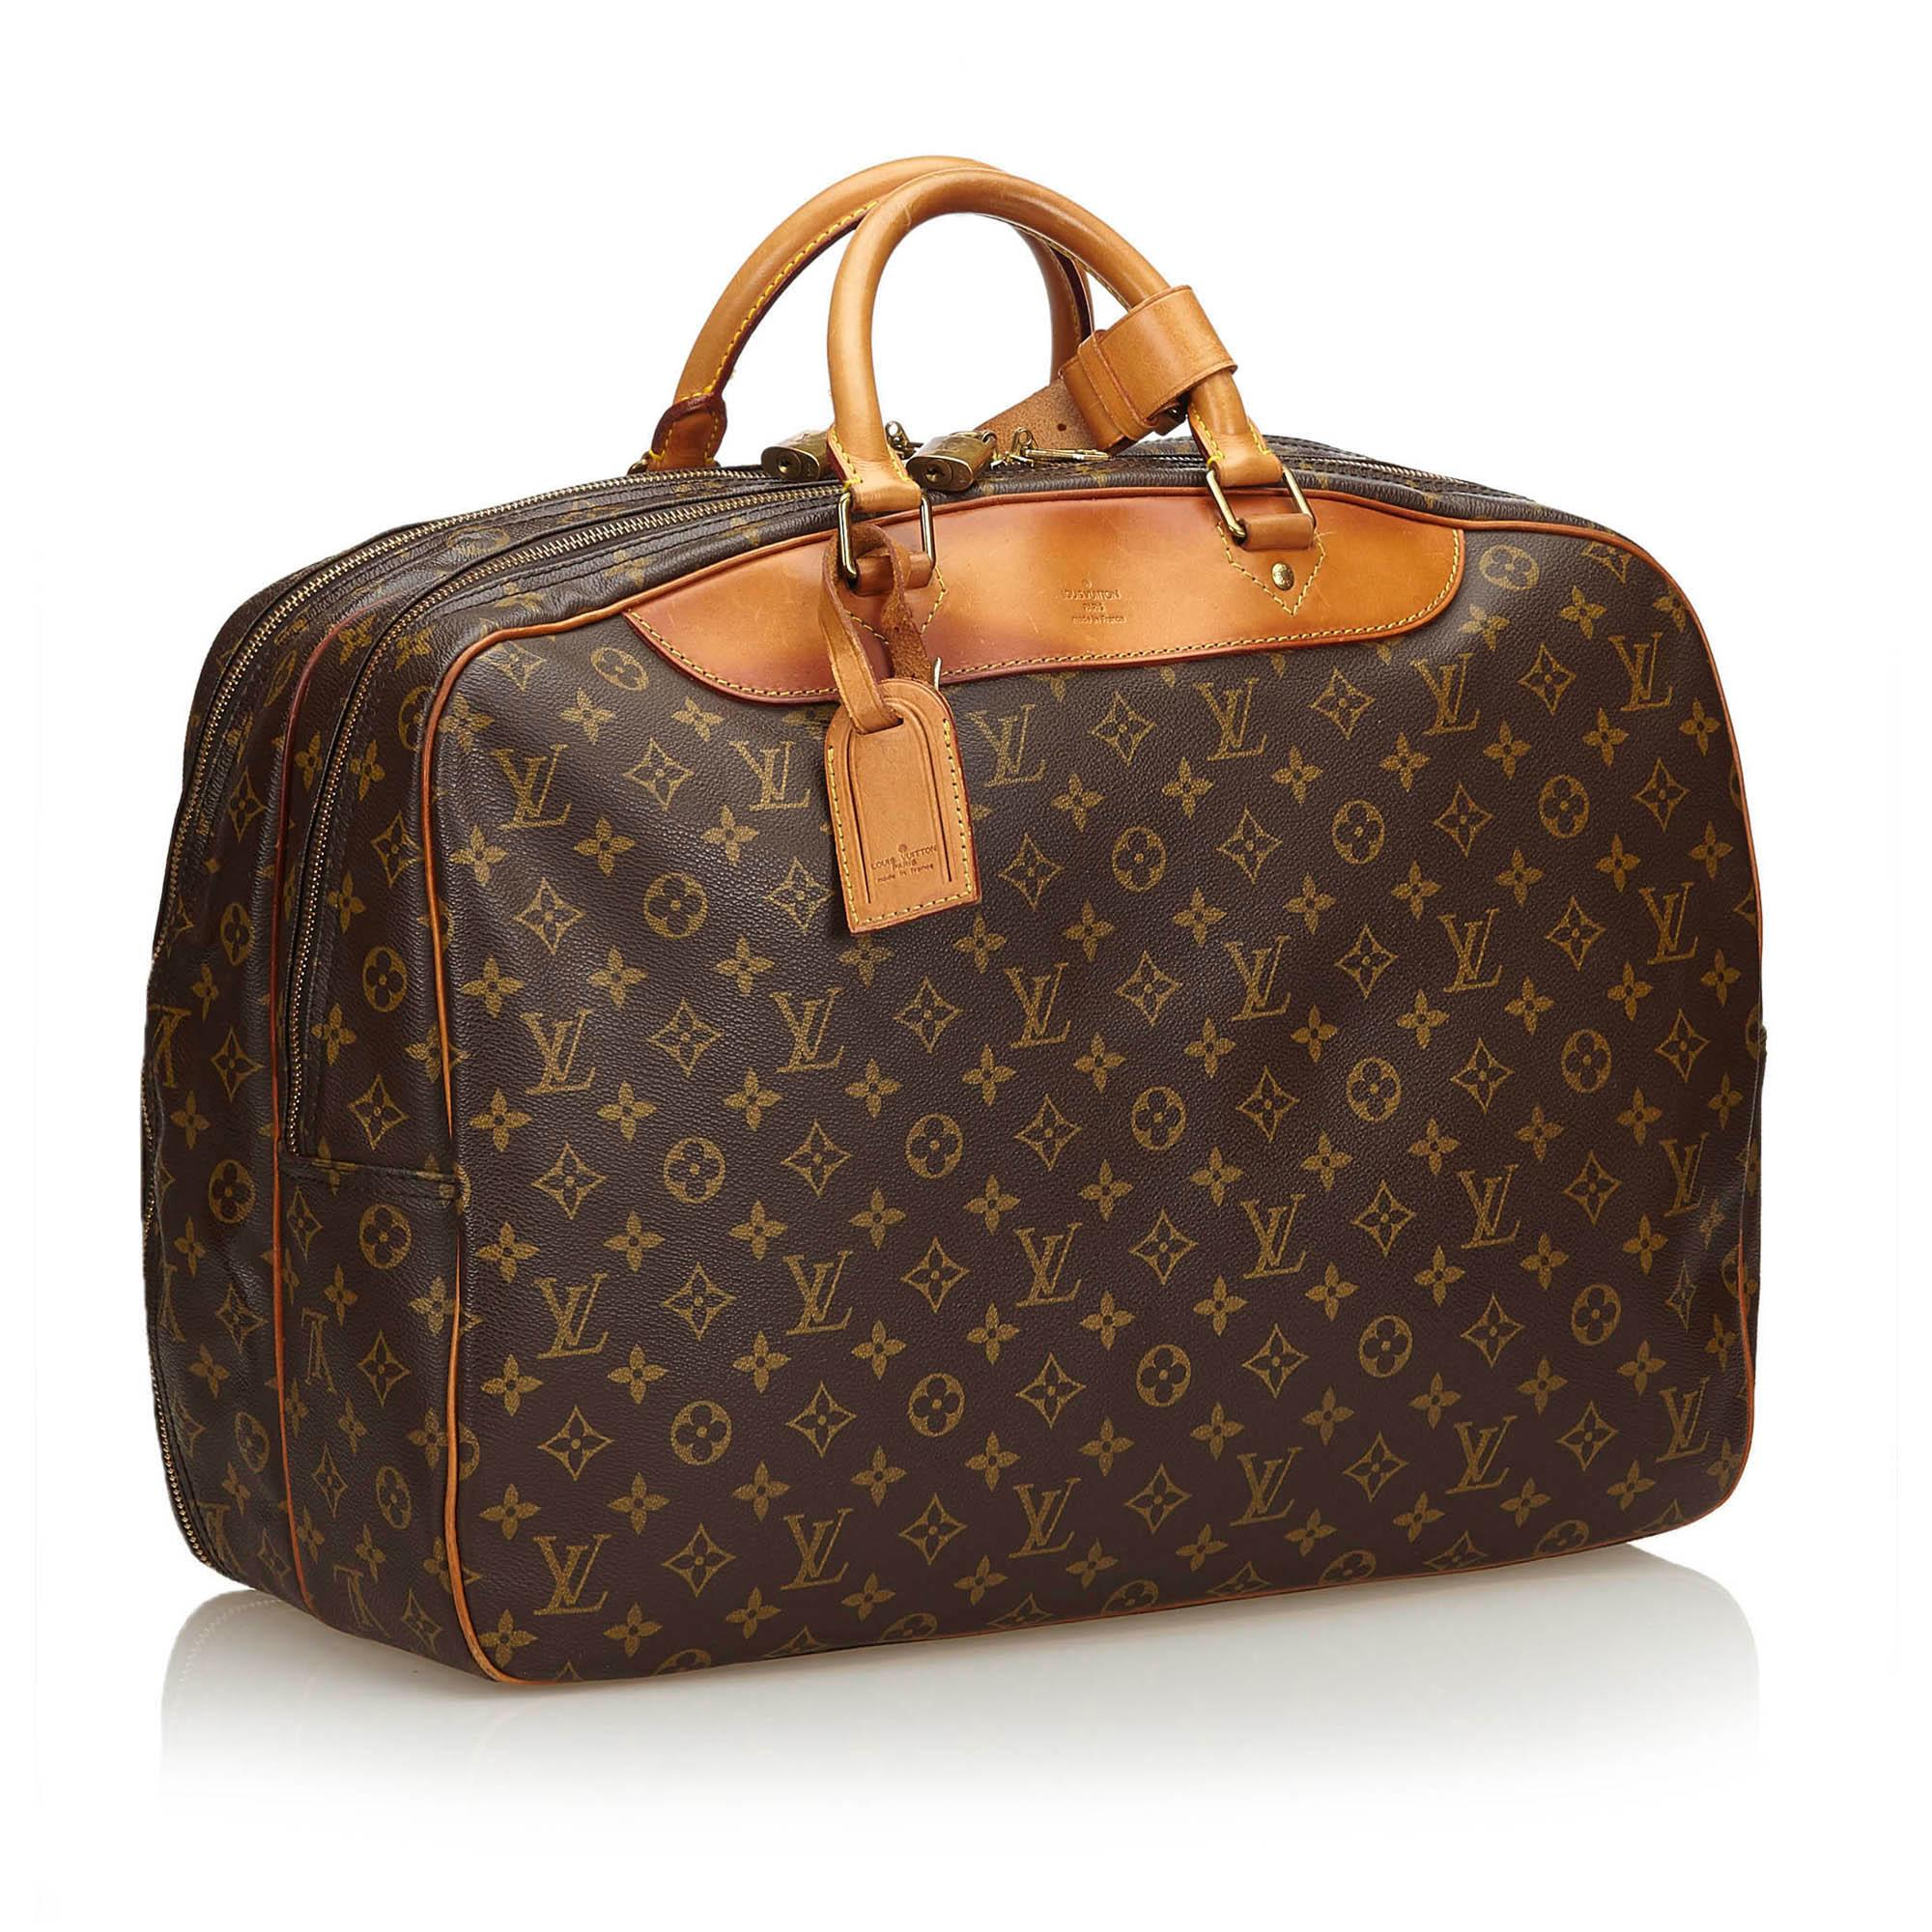 The Alize 2 Poches features a monogram canvas, rolled leather handles, a zip around closure, and interior slip and zip compartments It carries as B condition rating.

Inclusions: 
Padlock


Louis Vuitton pieces do not come with an authenticity